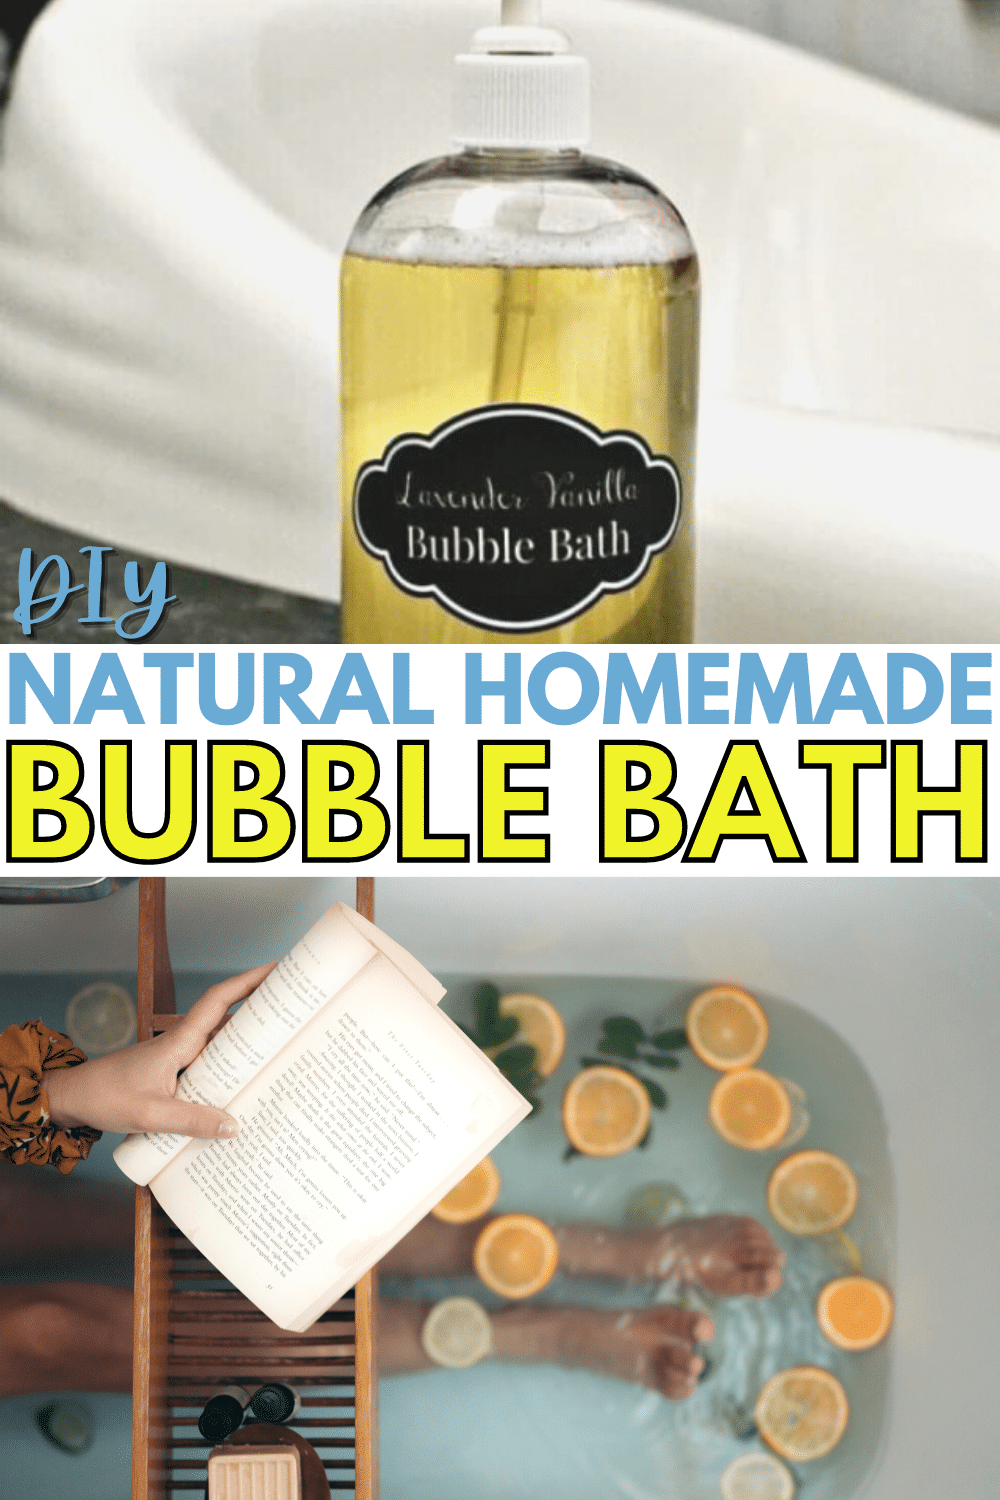 top image is lavender vanilla bubble bath in a container next to a white sink, bottom image is a hand holding a book and the person's legs in a bathtub with slices of fruit floating in the water, with title text reading DIY Natural Homemade Bubble Bath